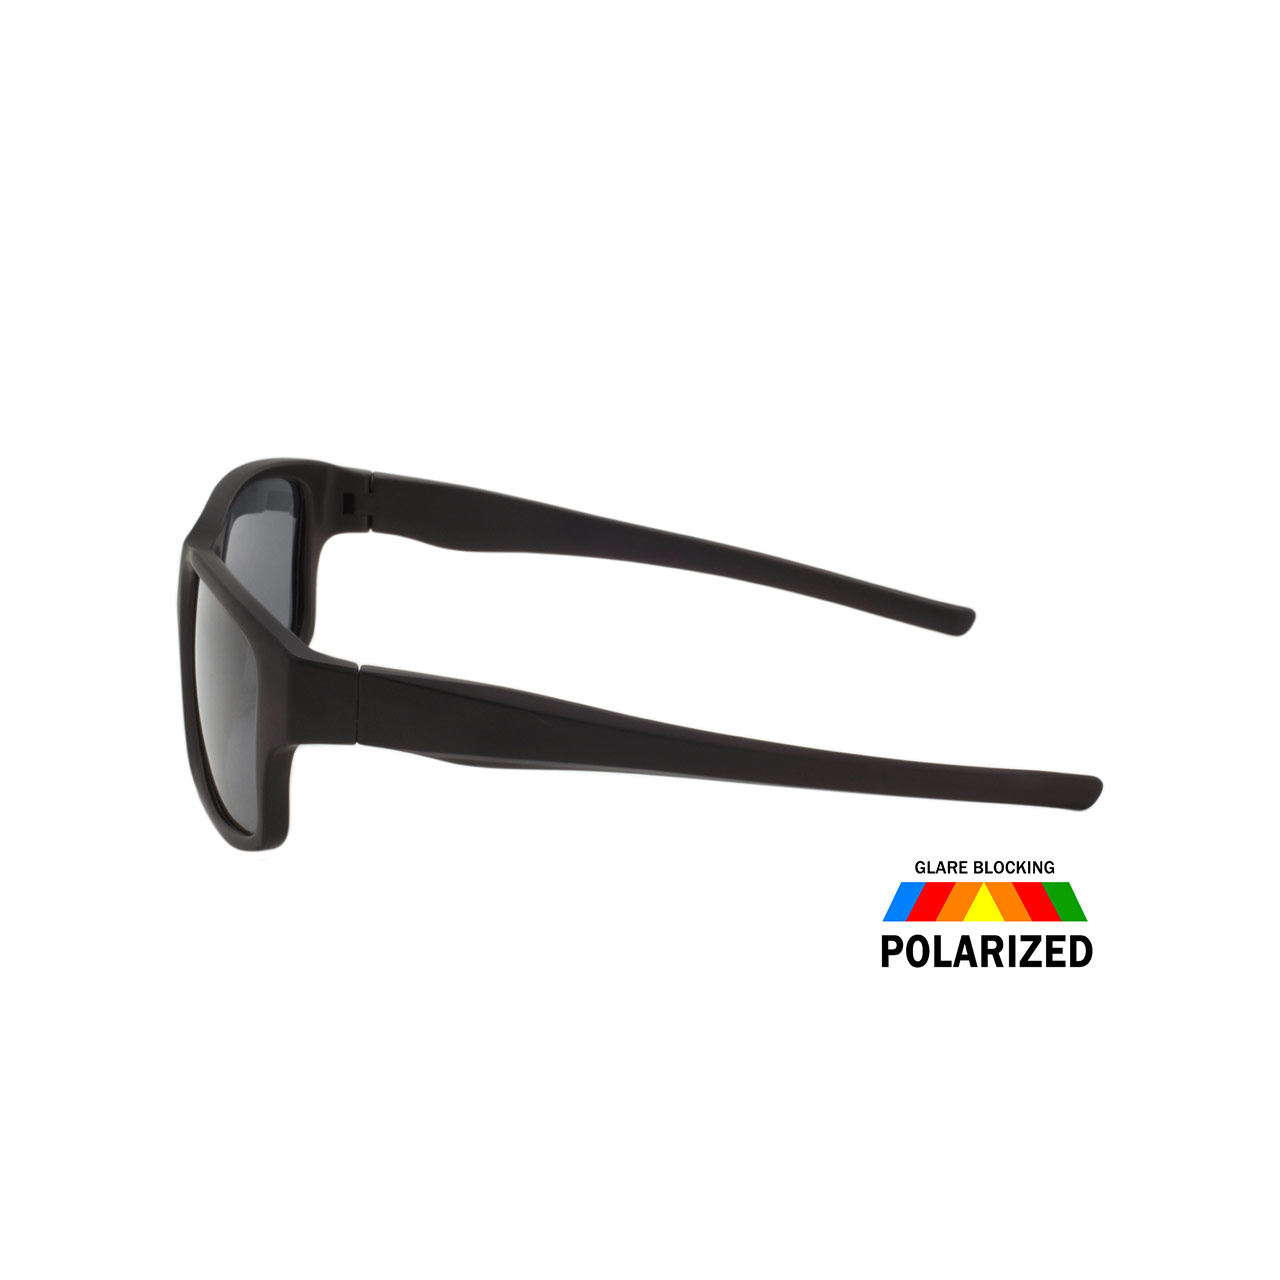 Mens Polarized Sunglasses 2 Pack All Black Sport Wrap Sunglass Style - image 4 of 5